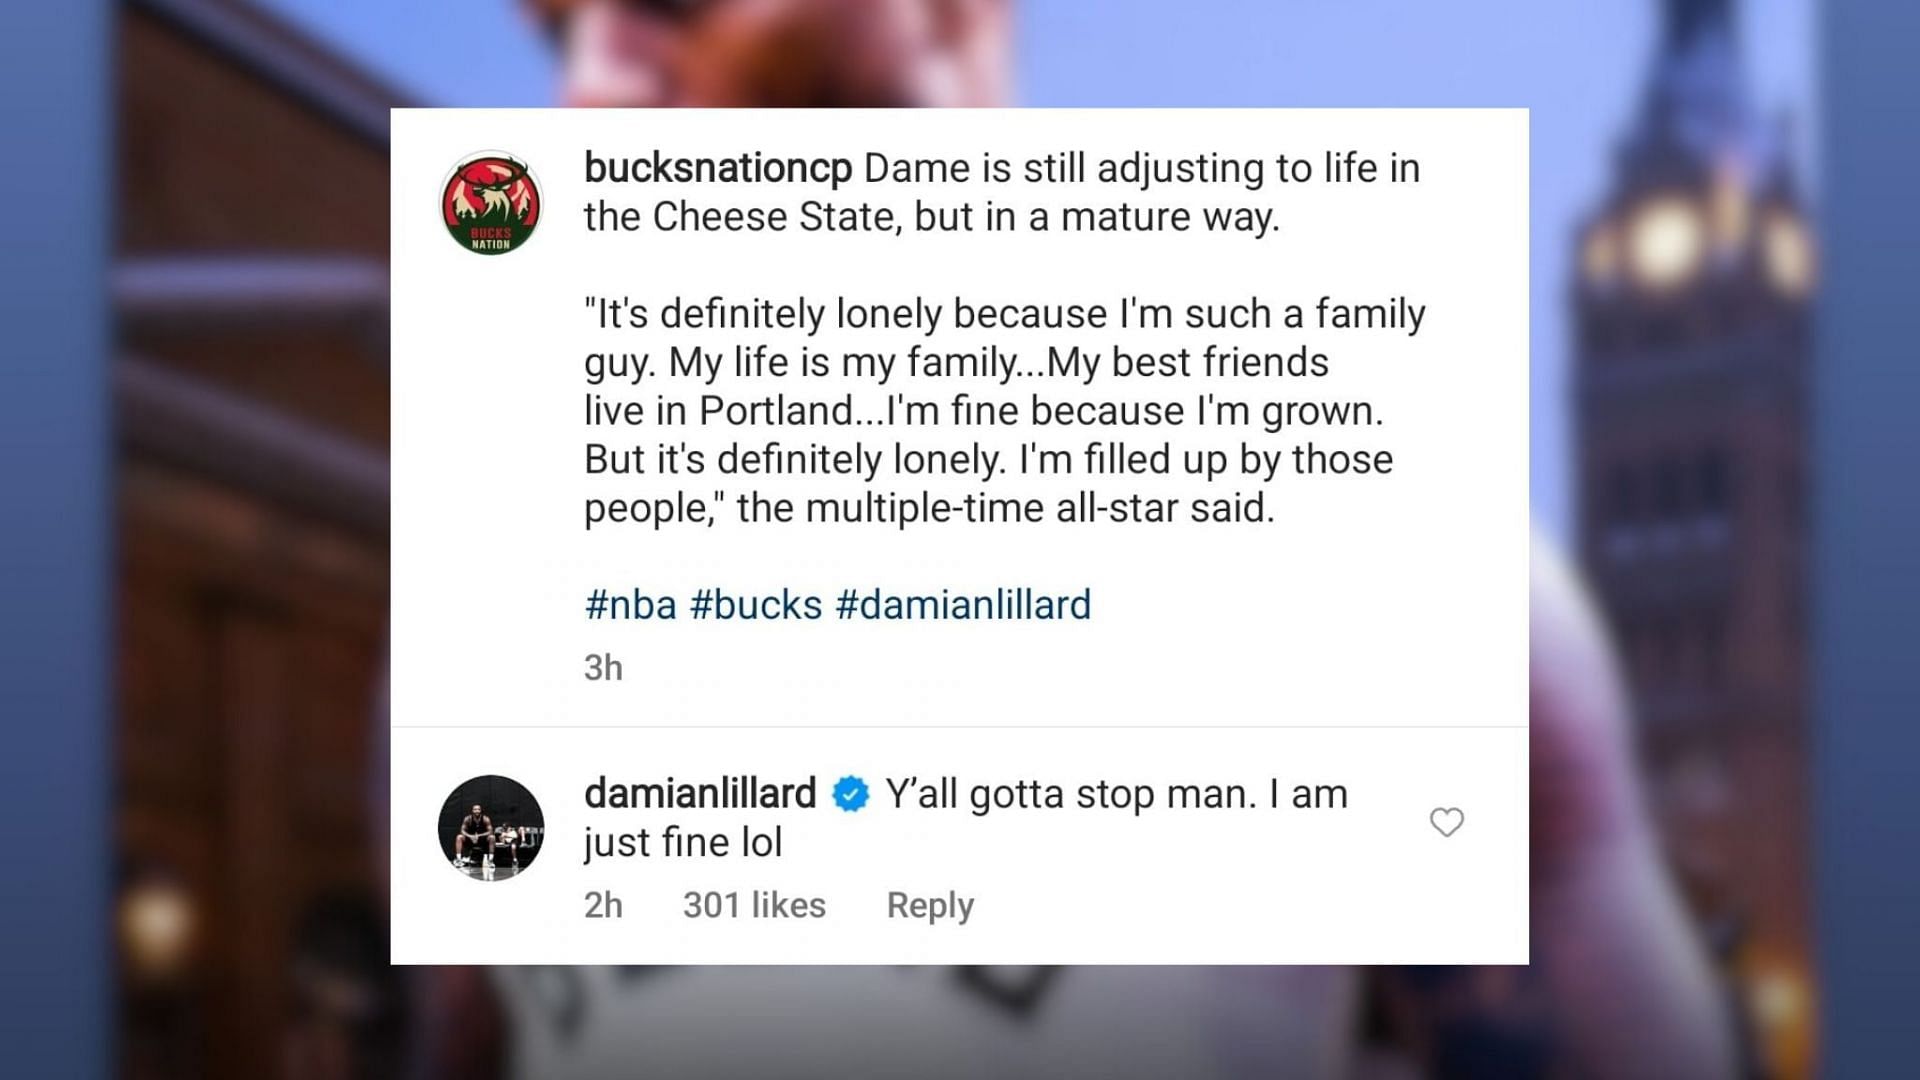 Dame comments on the post about his situation in Milwaukee.